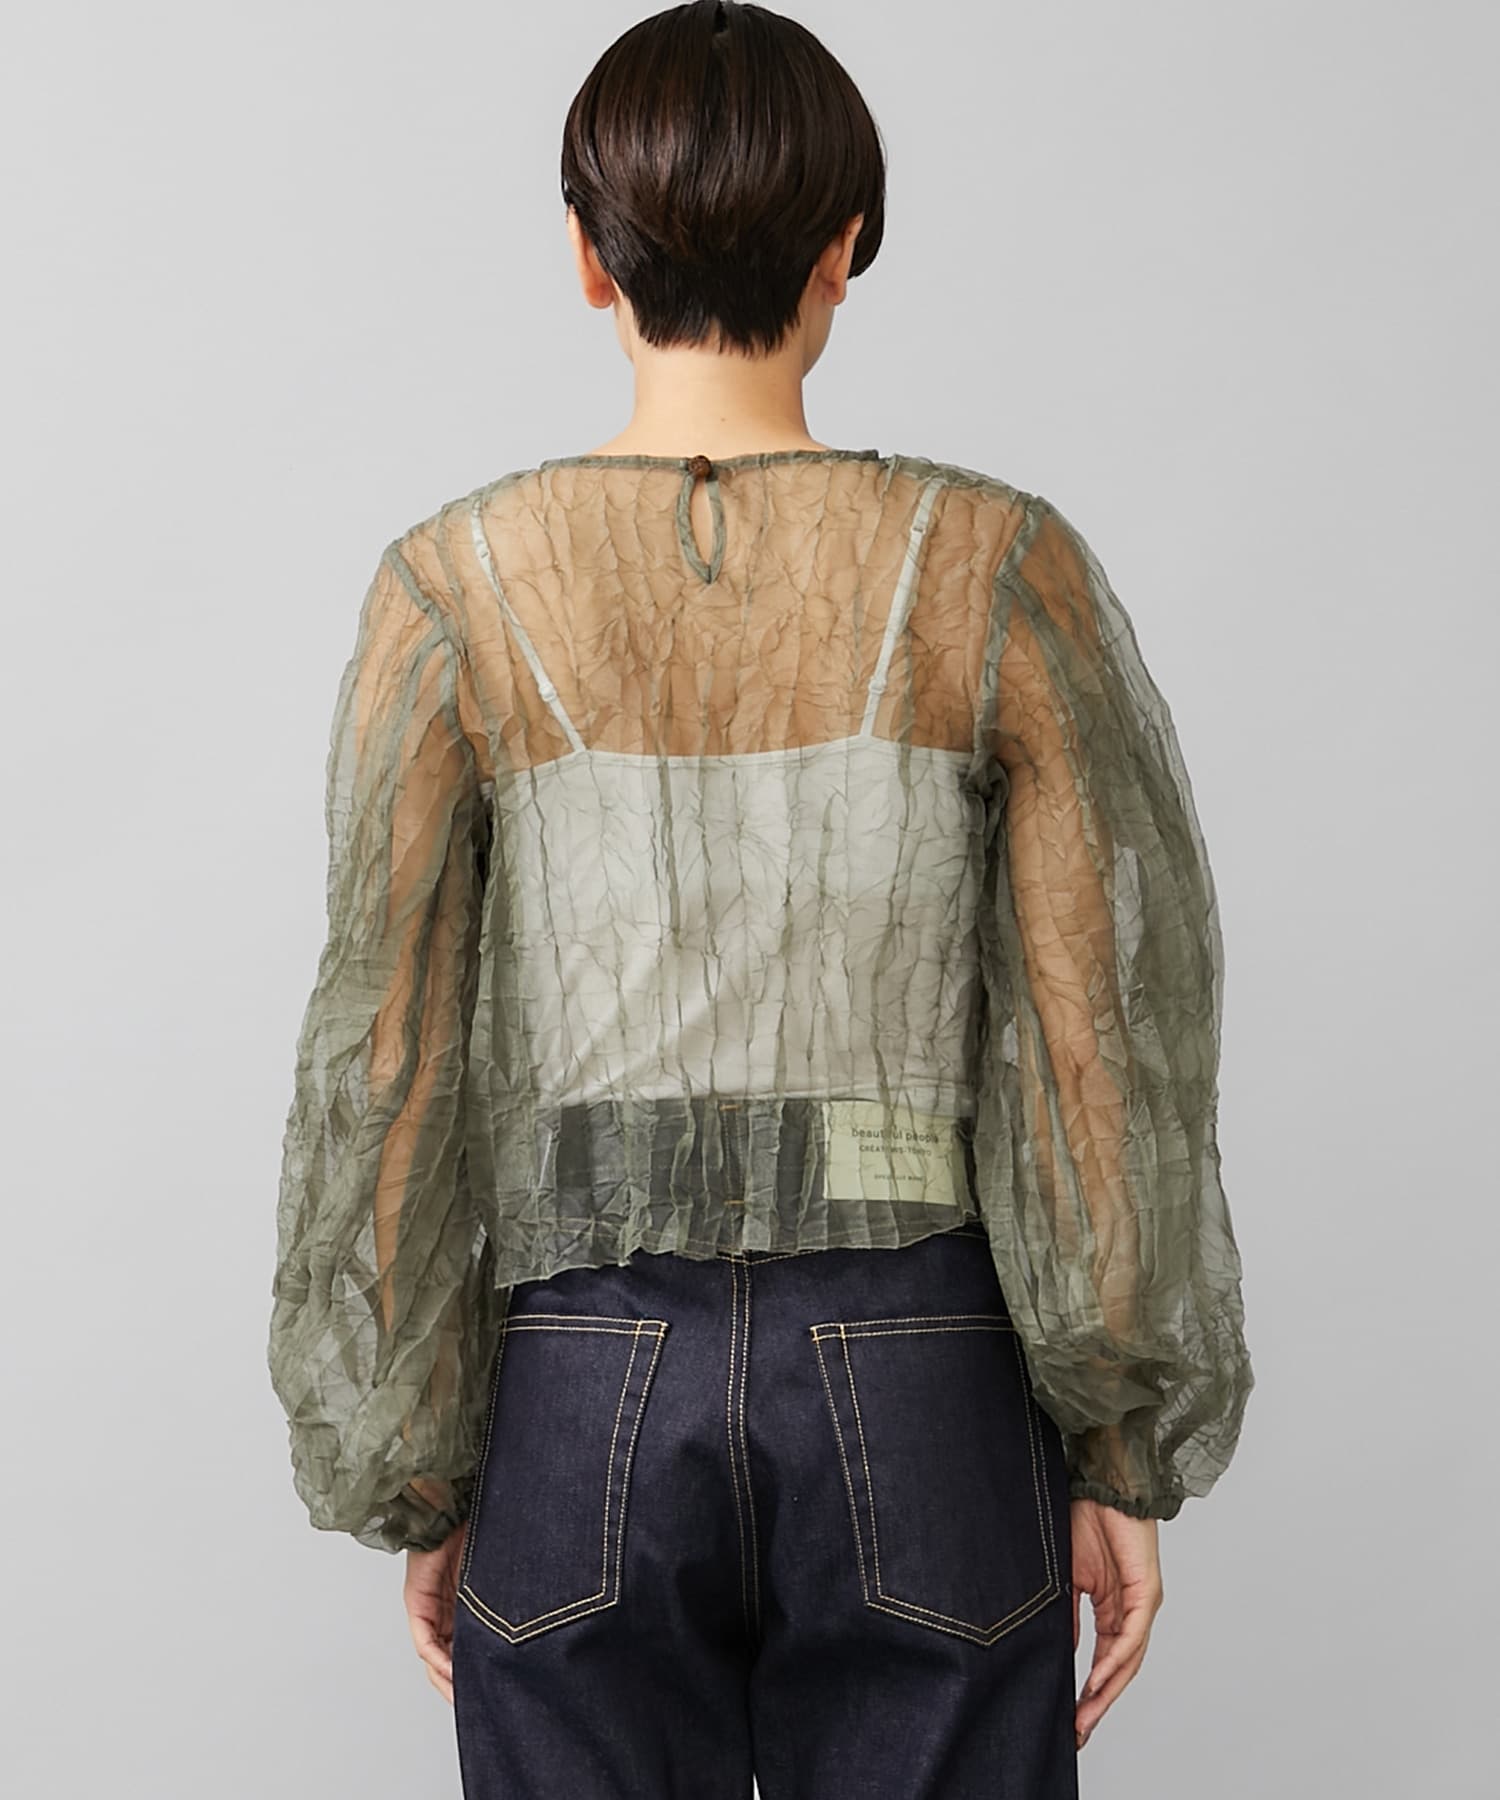 Recycle Organdy Pleats Top｜STUDIOUS